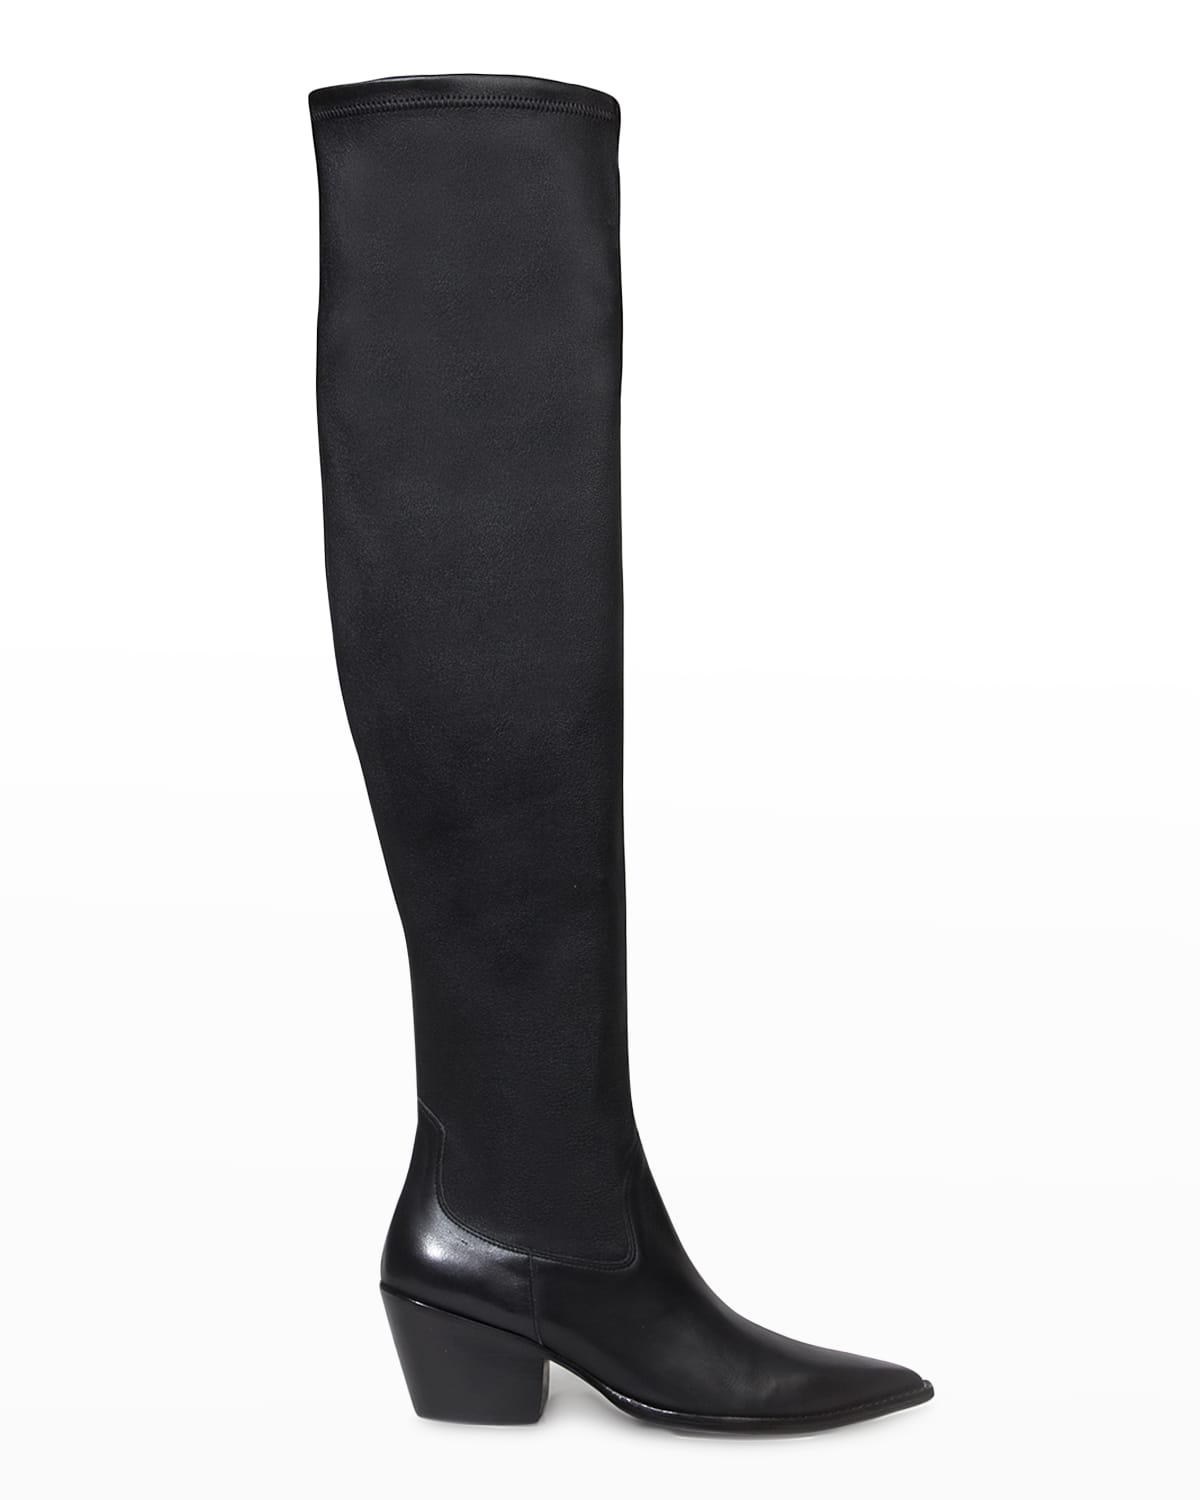 Black Suede Studio Kenedy Leather Over-The-Knee Boots